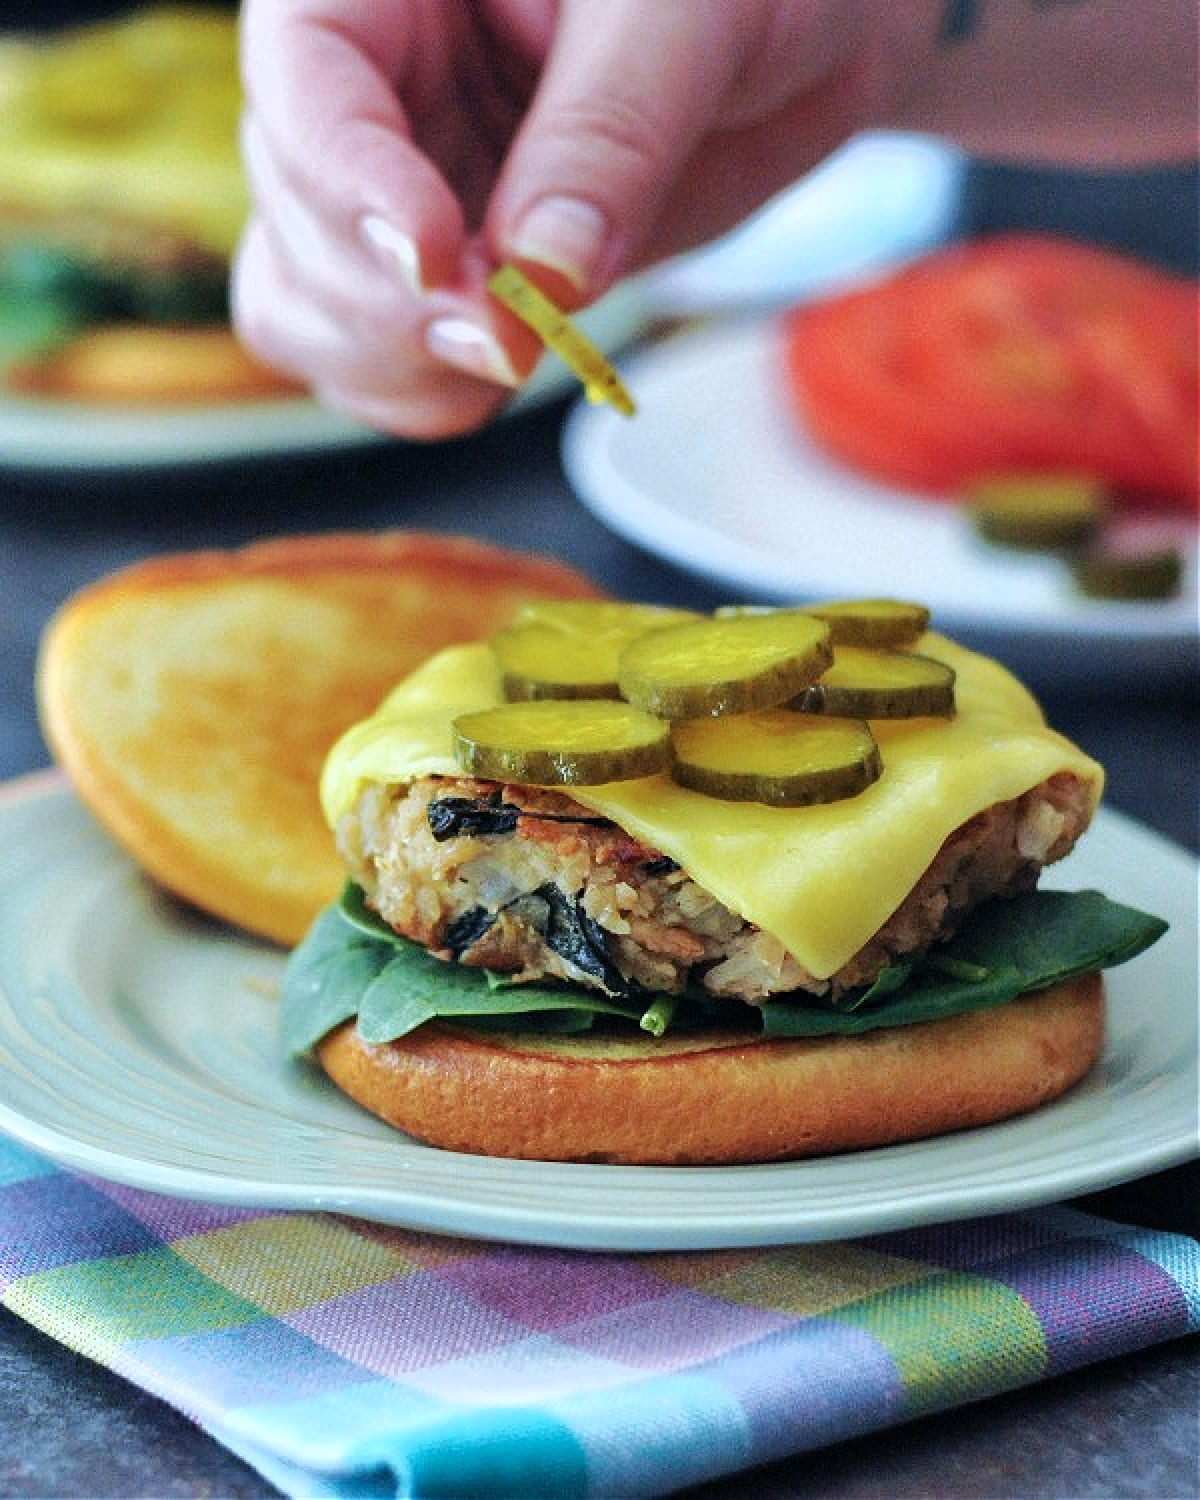 A hand adding pickle chips to the top of a cheeseburger sitting on a light green plate. Another plate of pickles and tomato slices is blurred in background, and the burger plate sits on a pastel plaid cloth napkin.